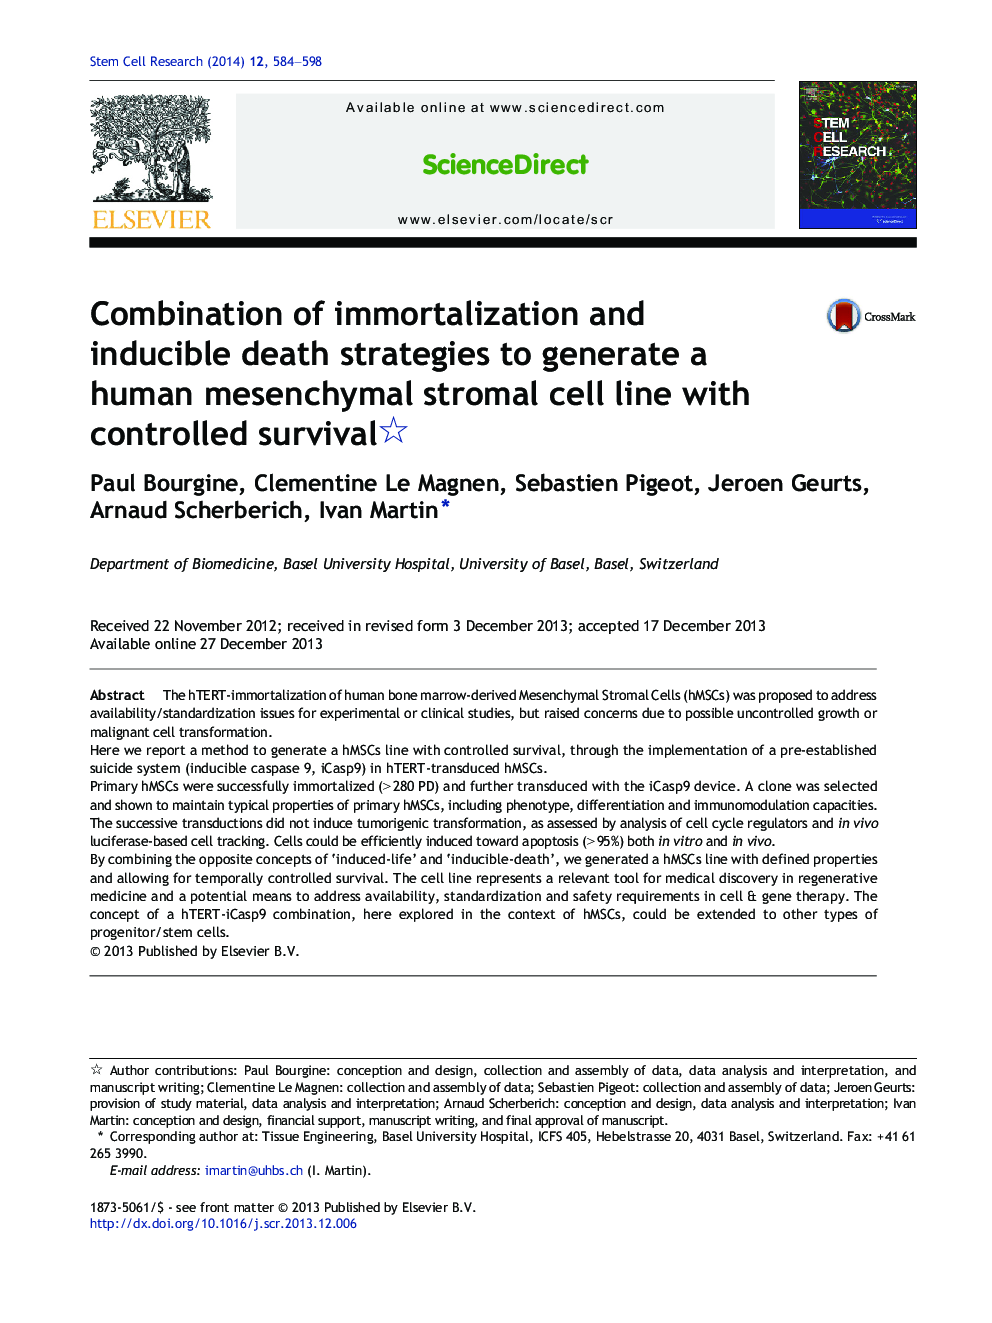 Combination of immortalization and inducible death strategies to generate a human mesenchymal stromal cell line with controlled survival 